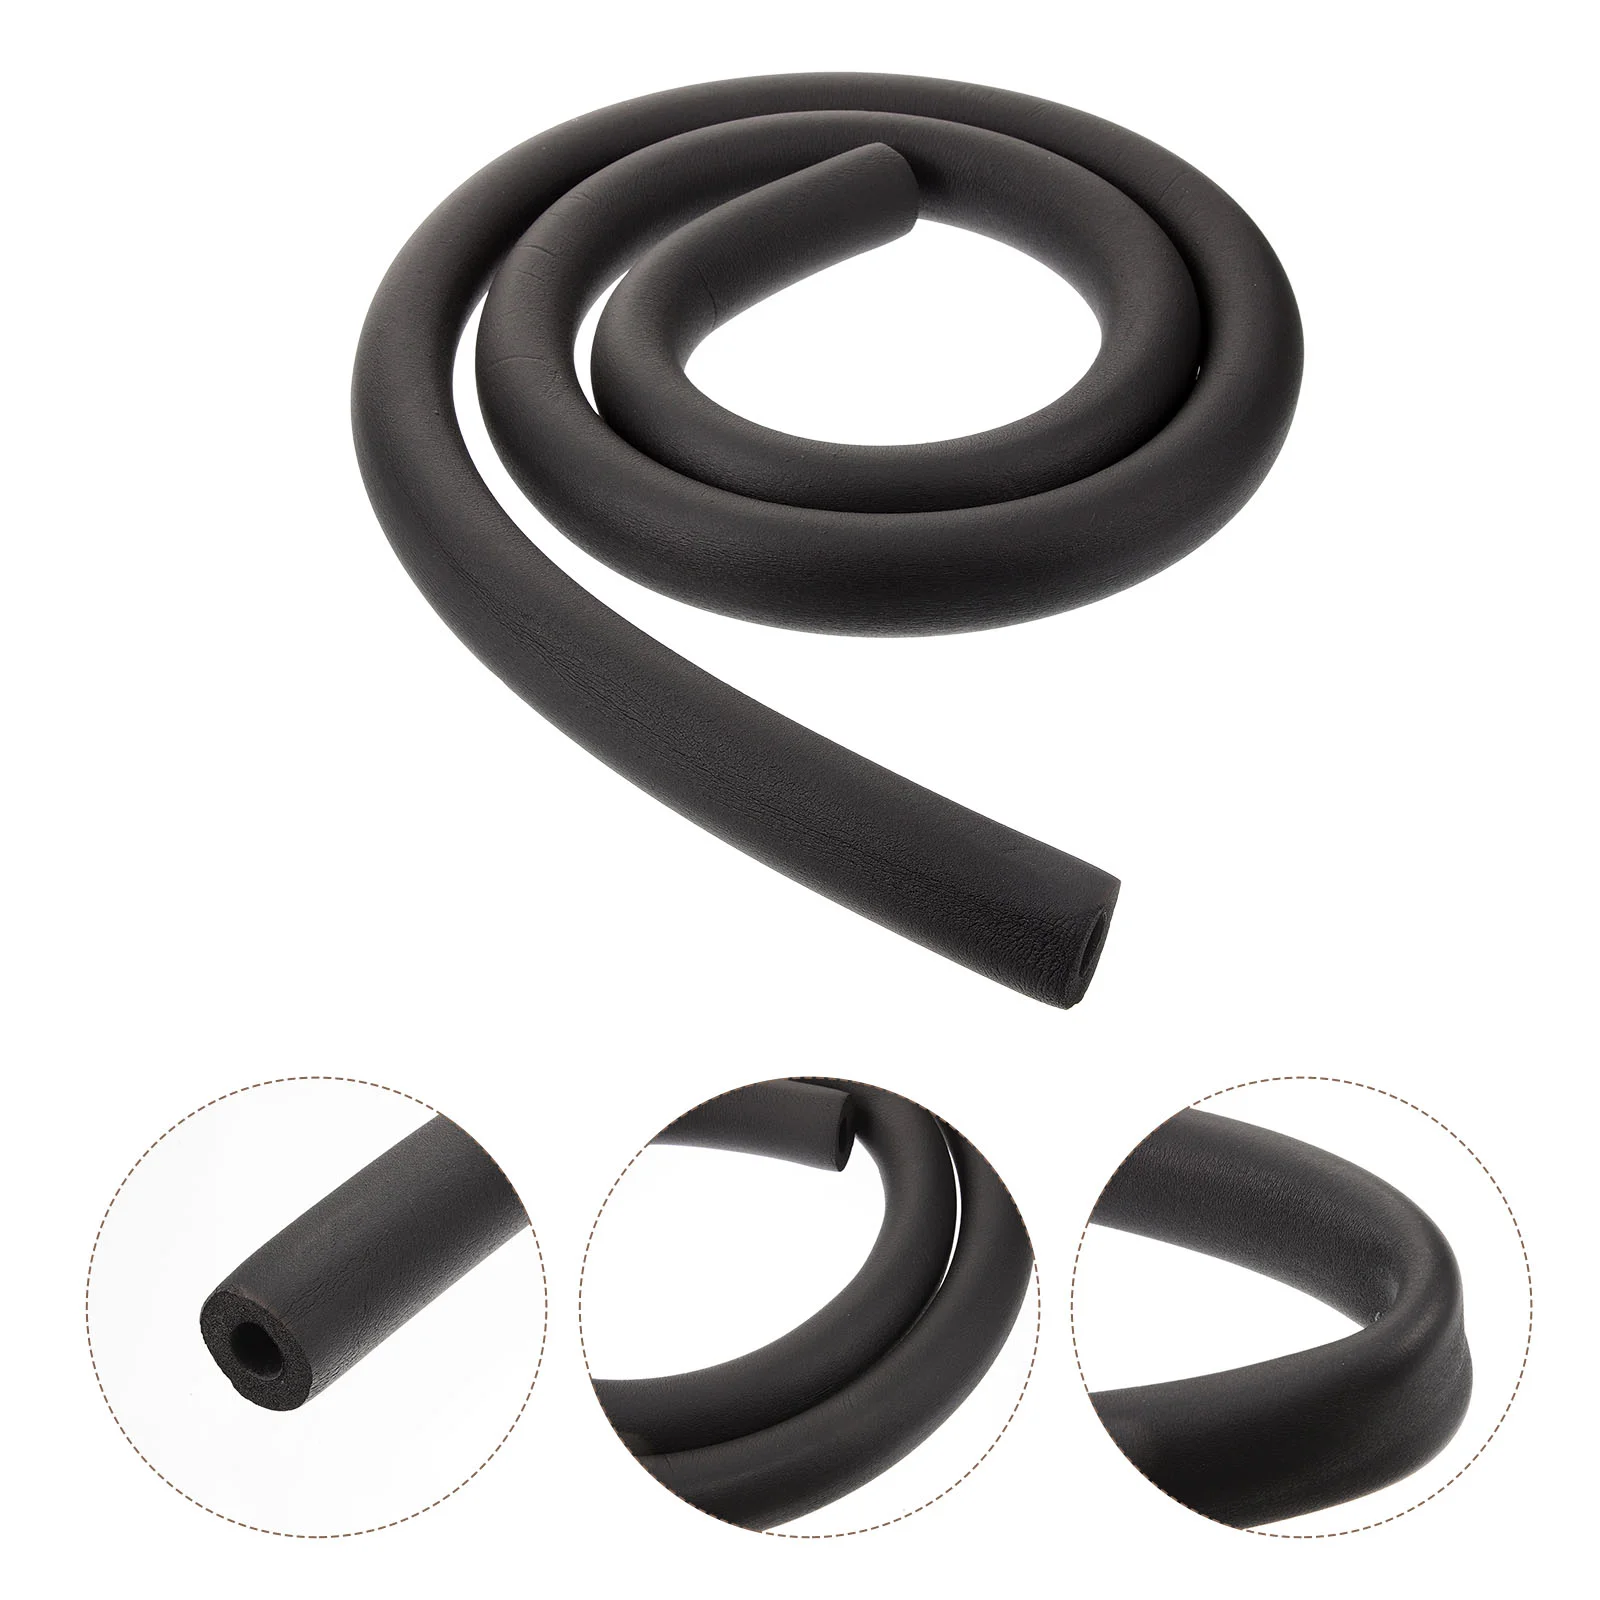 

Insulation Cotton Pipe Rubber Covers Sleeve Covering Water Hose for Winter outside Pipes